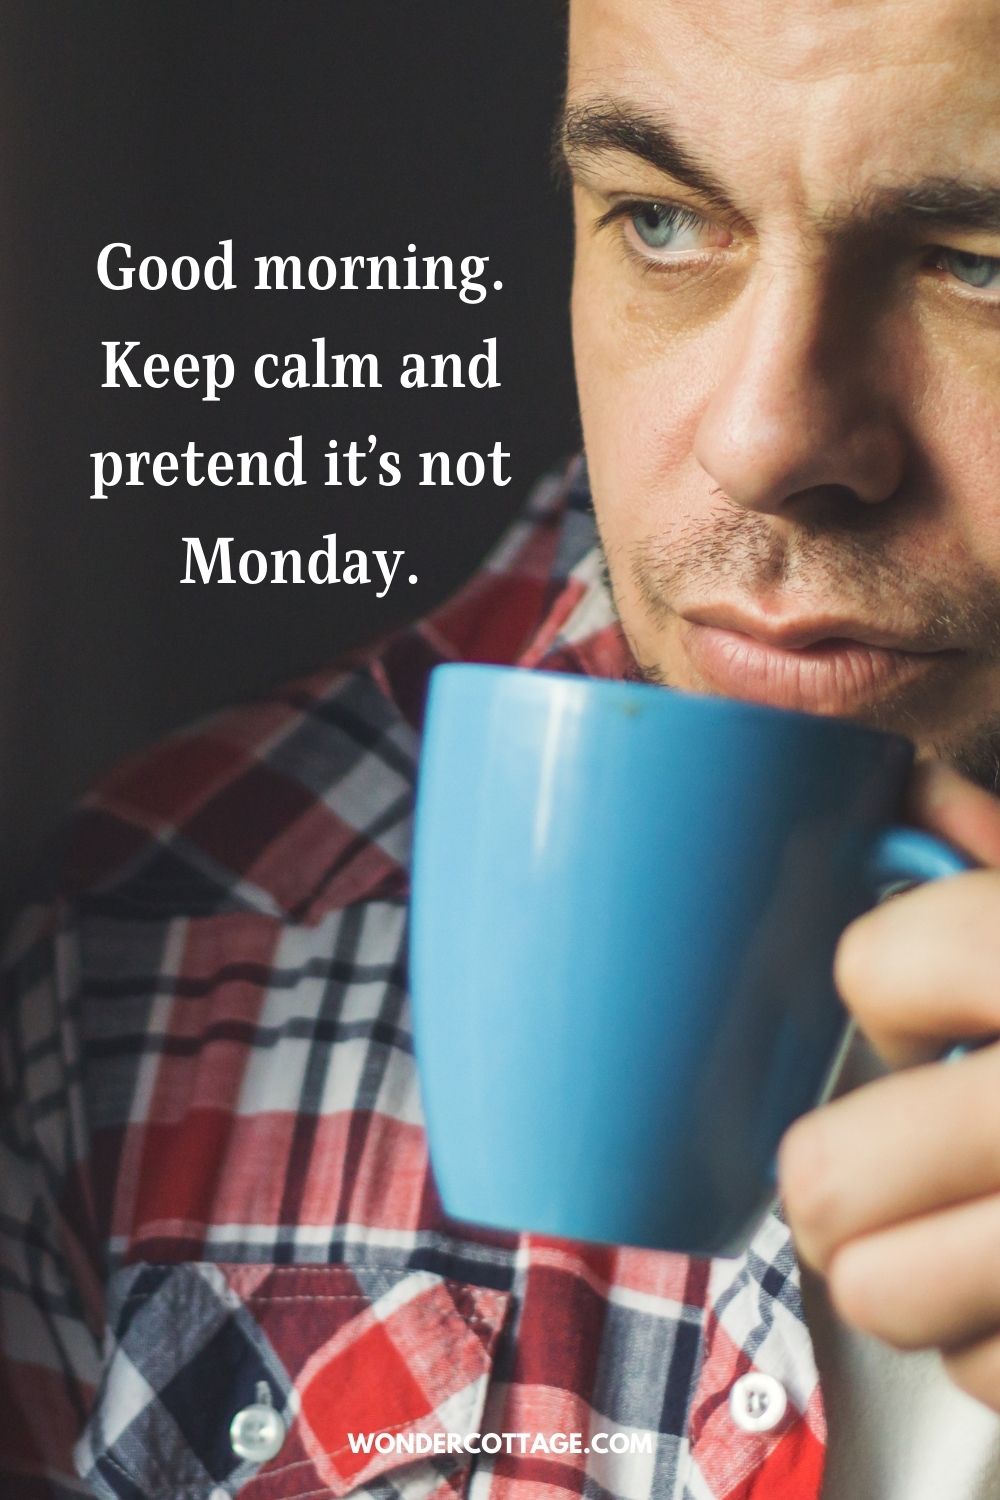 Good morning. Keep calm and pretend it’s not Monday.